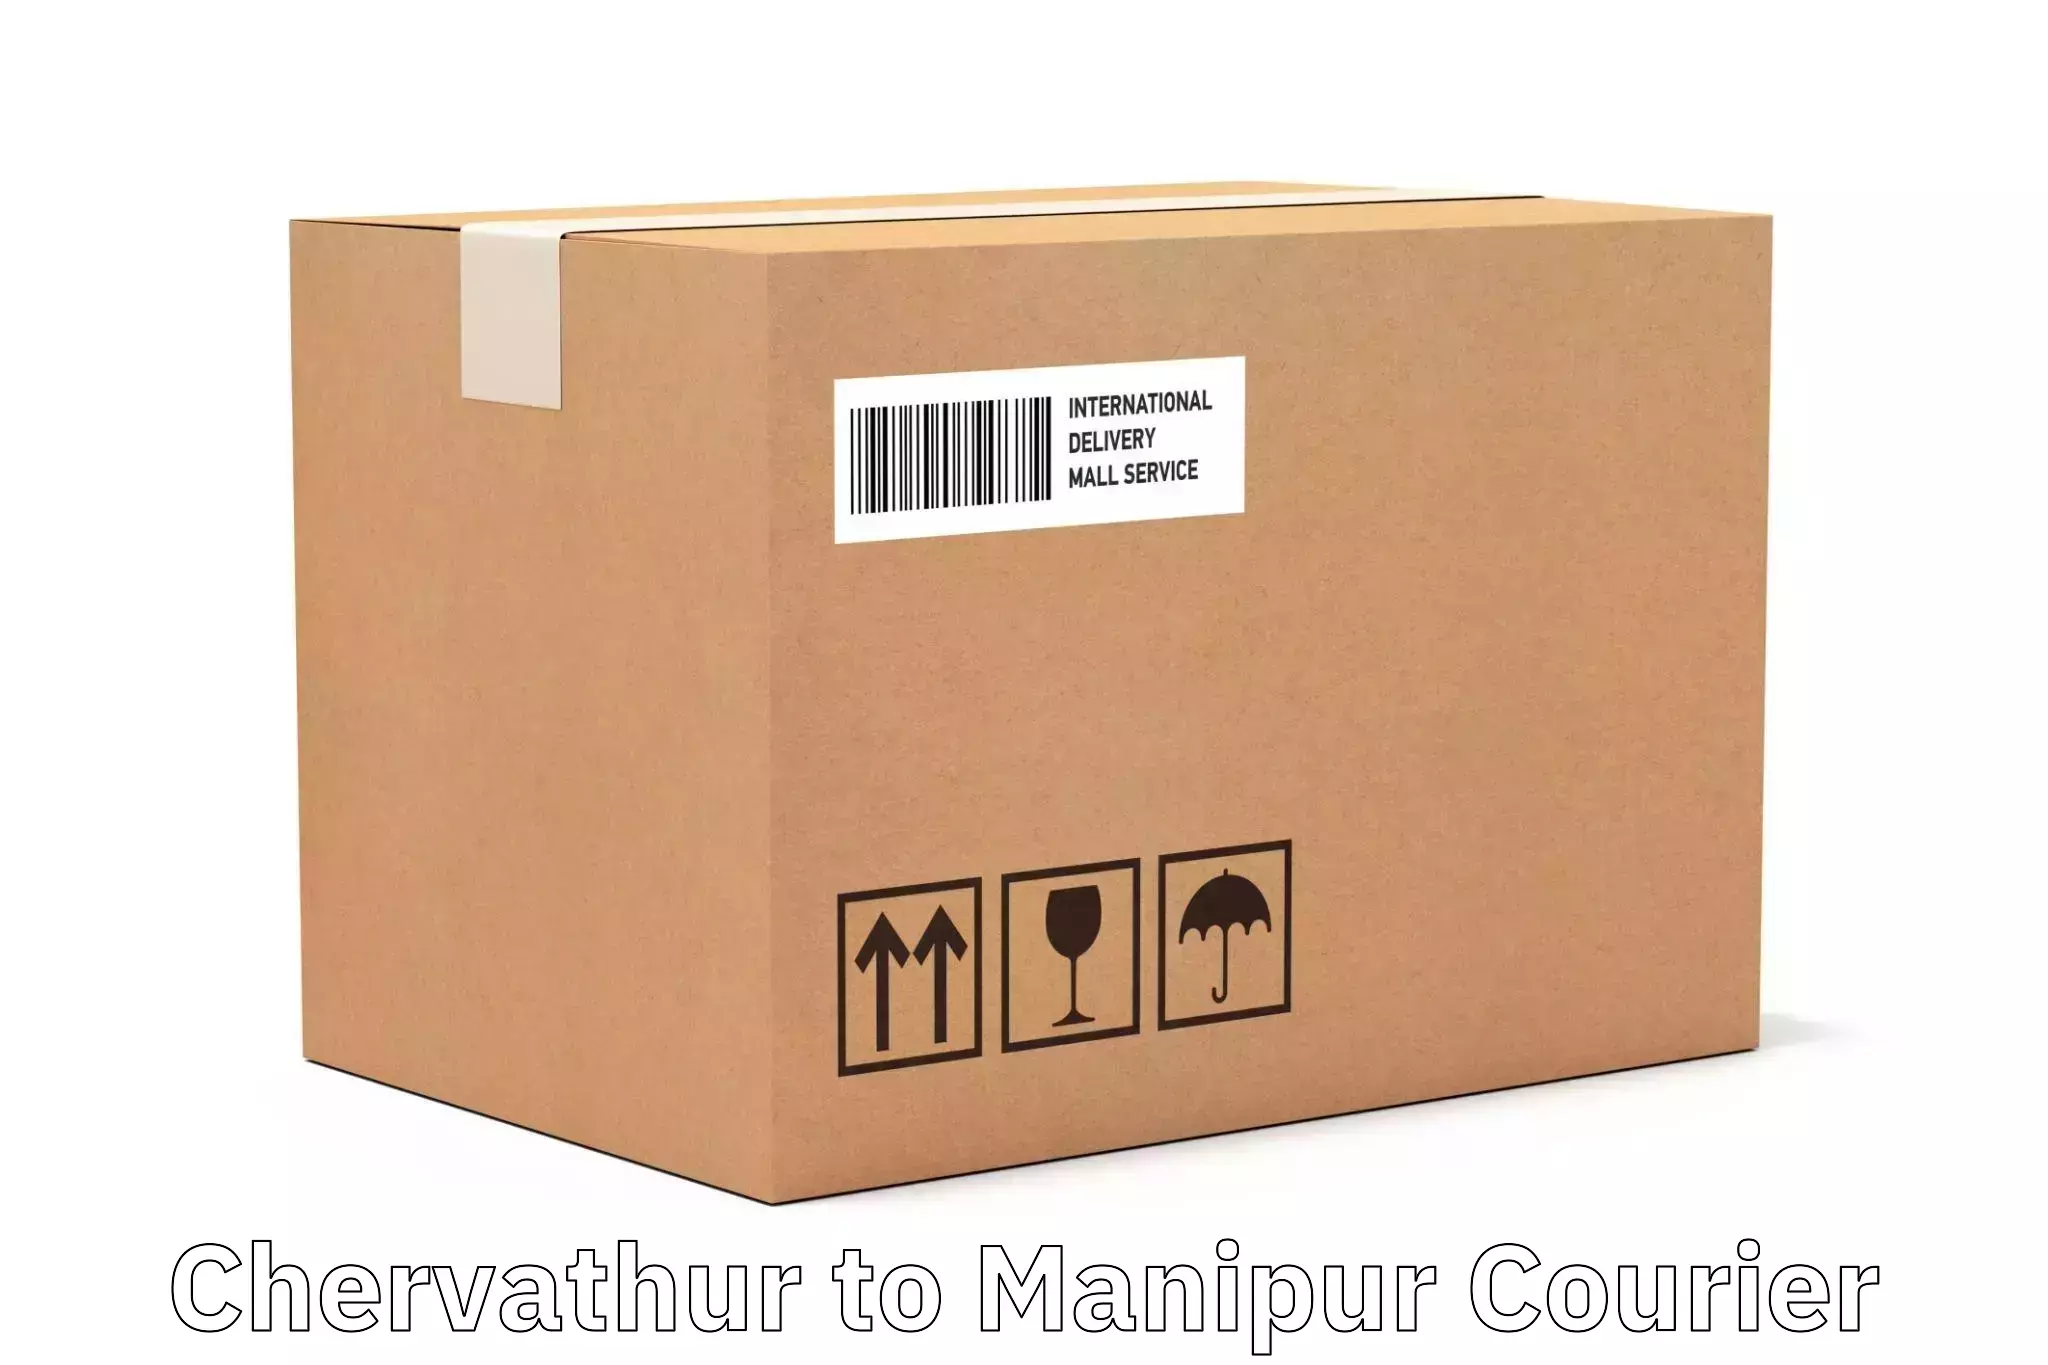 Long distance courier Chervathur to NIT Manipur